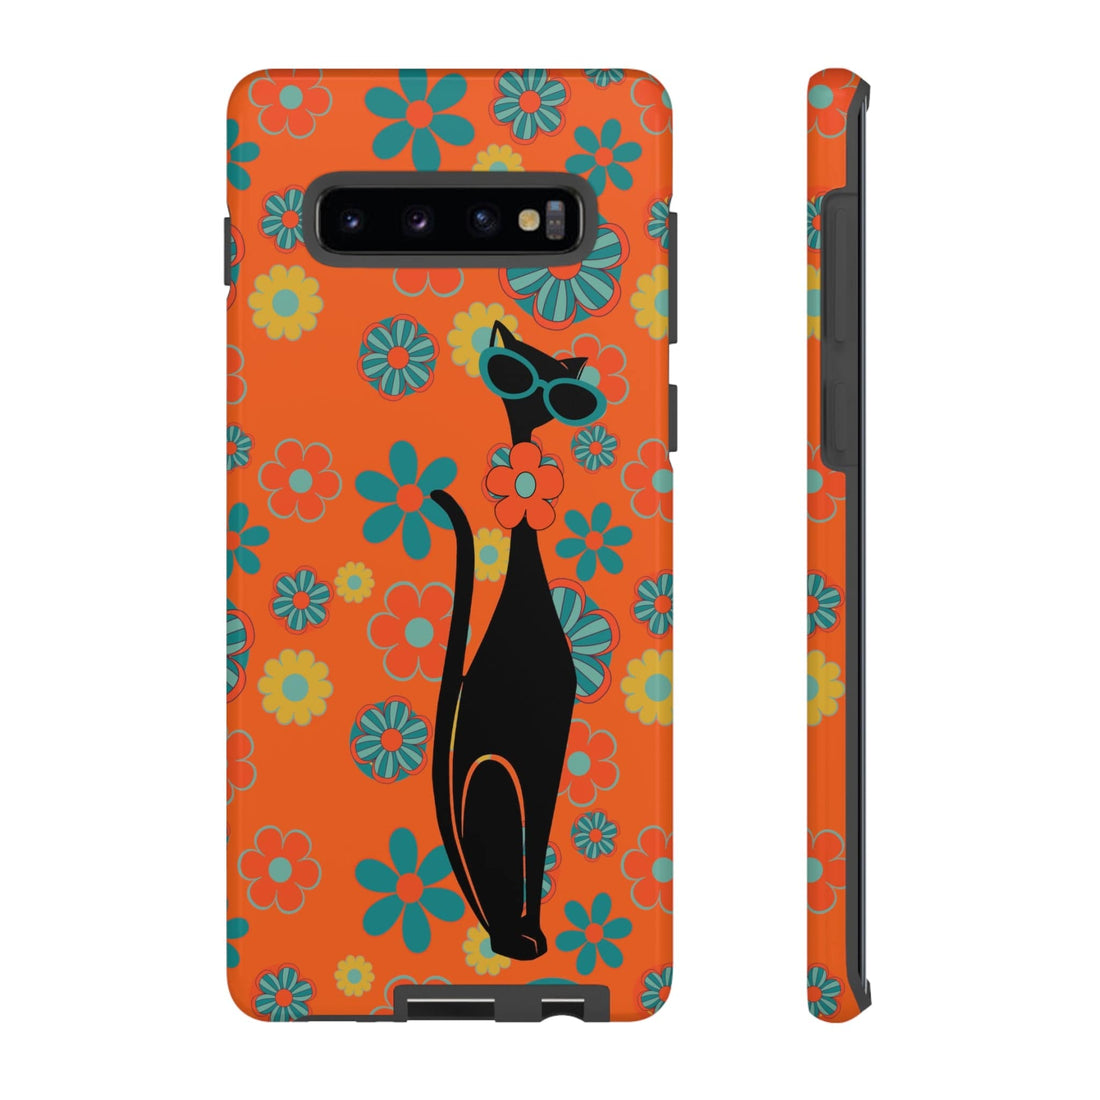 Flower Power, Retro Groovy Atomic Cat, Hipster Style Orange Samsung Galaxy and Google Pixel Tough Cases Phone Case Samsung Galaxy S10 Plus / Glossy